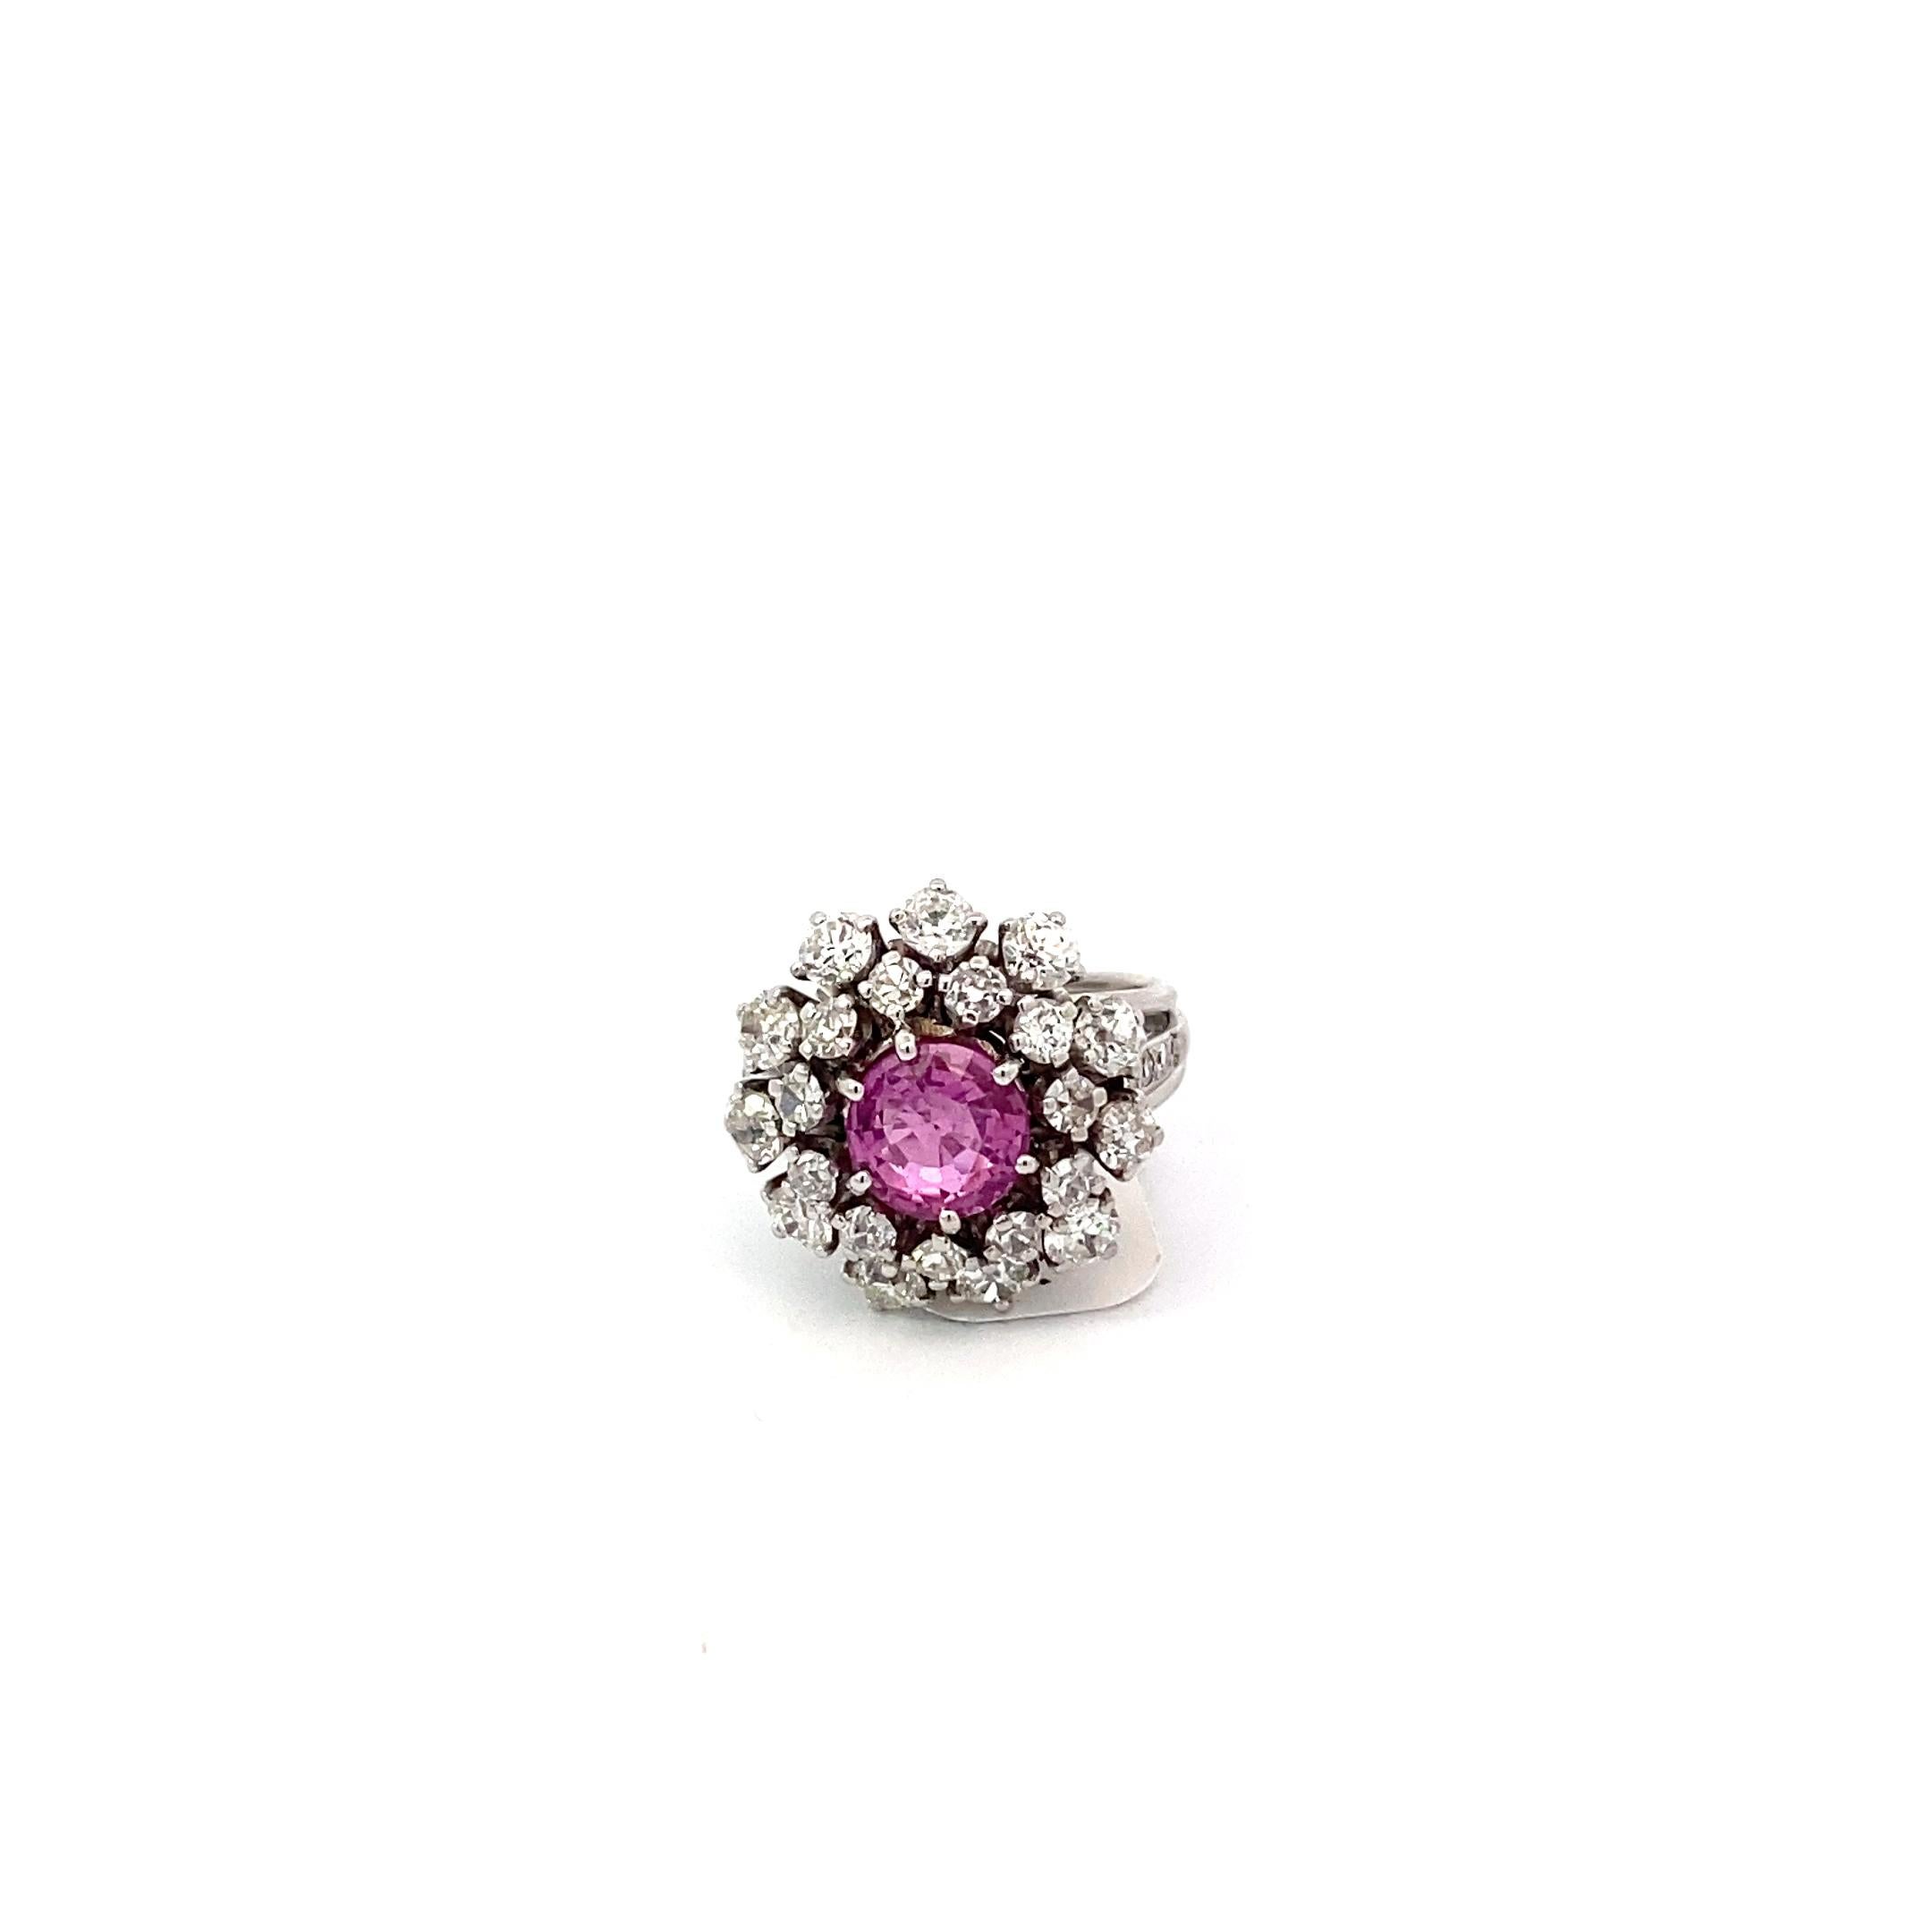 This gorgeous ring from the Mid Century period features a unique 2.04 ct pink sapphire surrounded by thirty (30) (approximately 2 cts) of Old European Cut and Siblige Cut diamonds in a halo setting. This massive ring packs a big punch, the Center